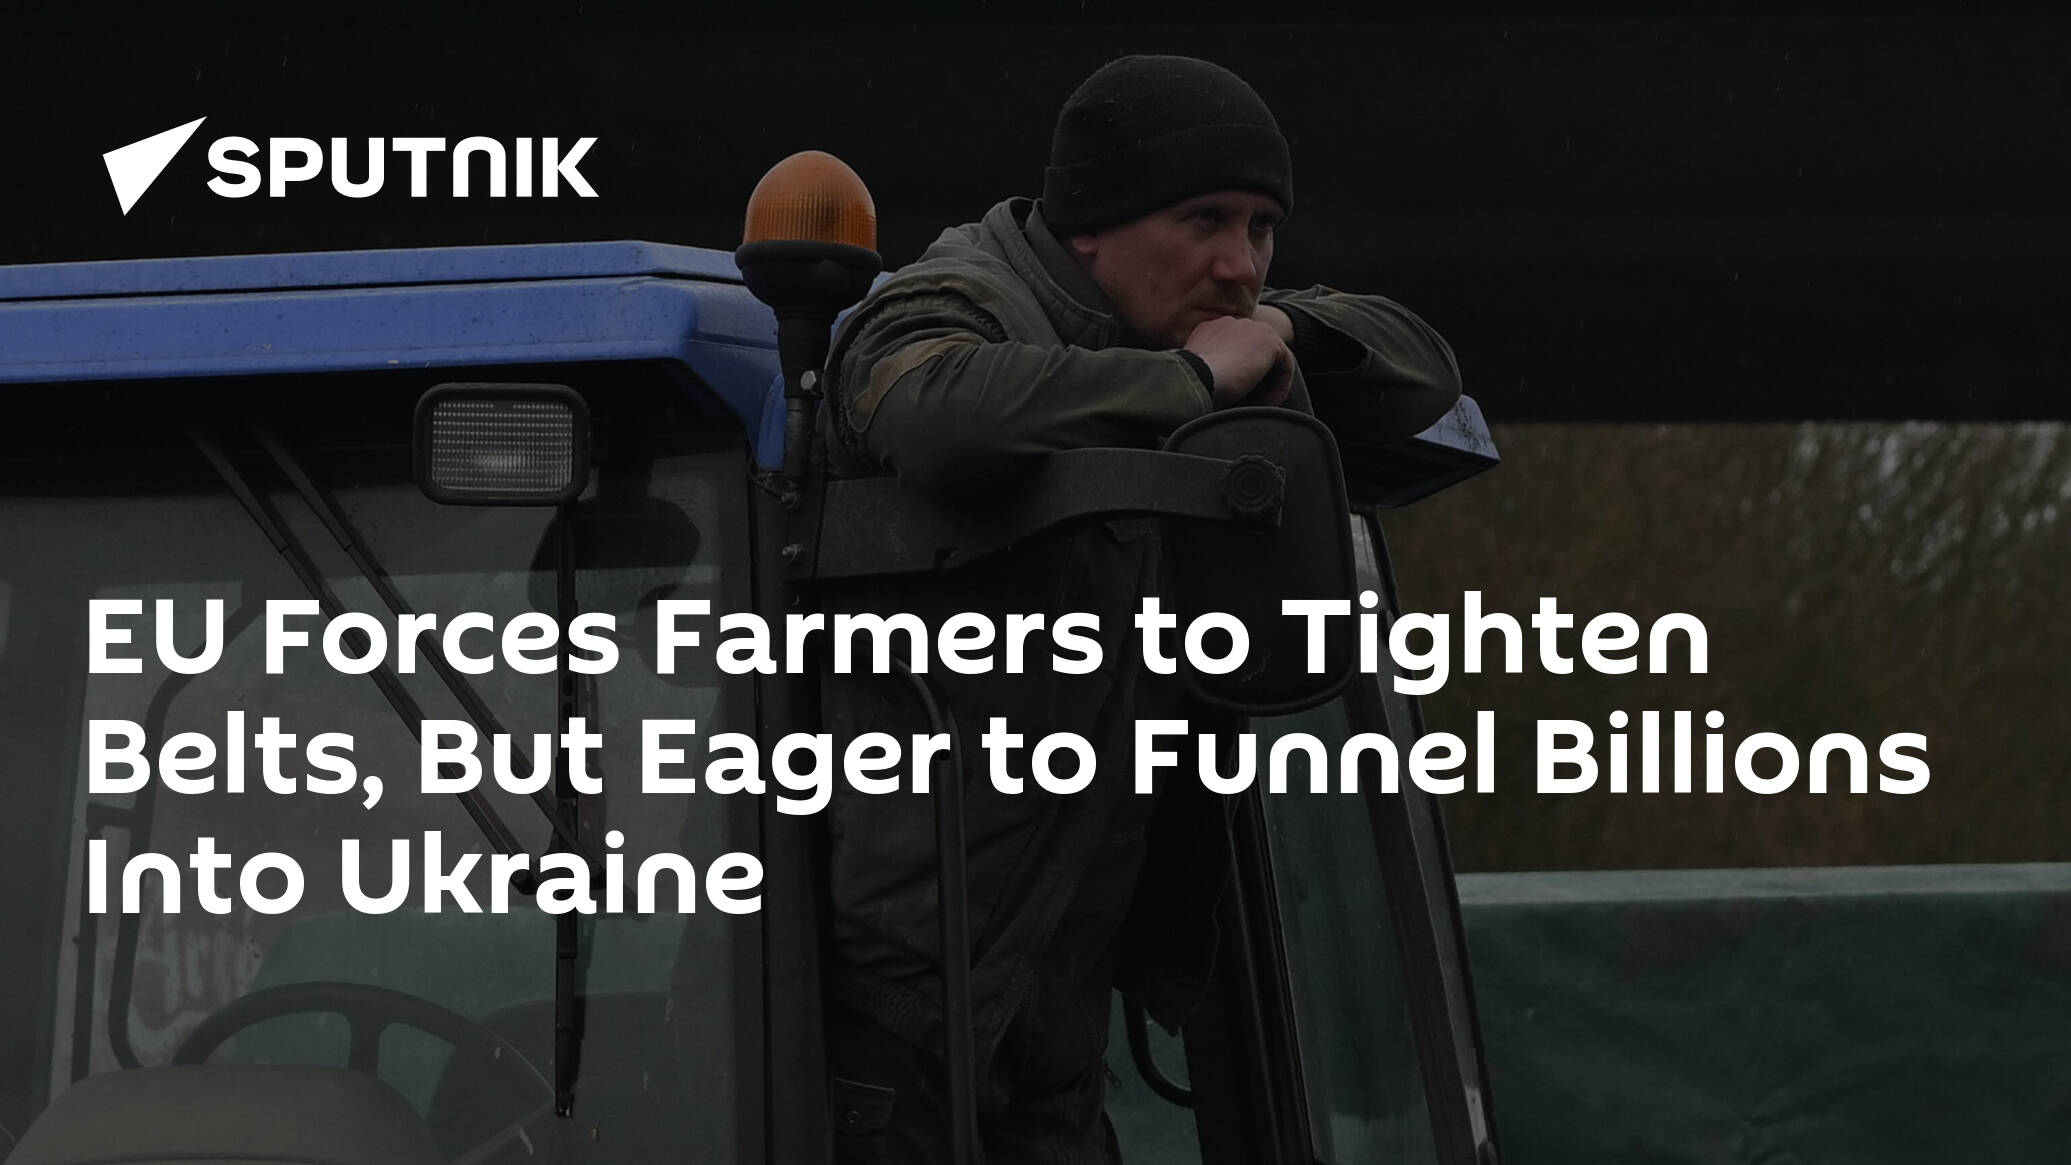 EU Forces Farmers to Tighten Belts, But Eager to Funnel Billions Into Ukraine